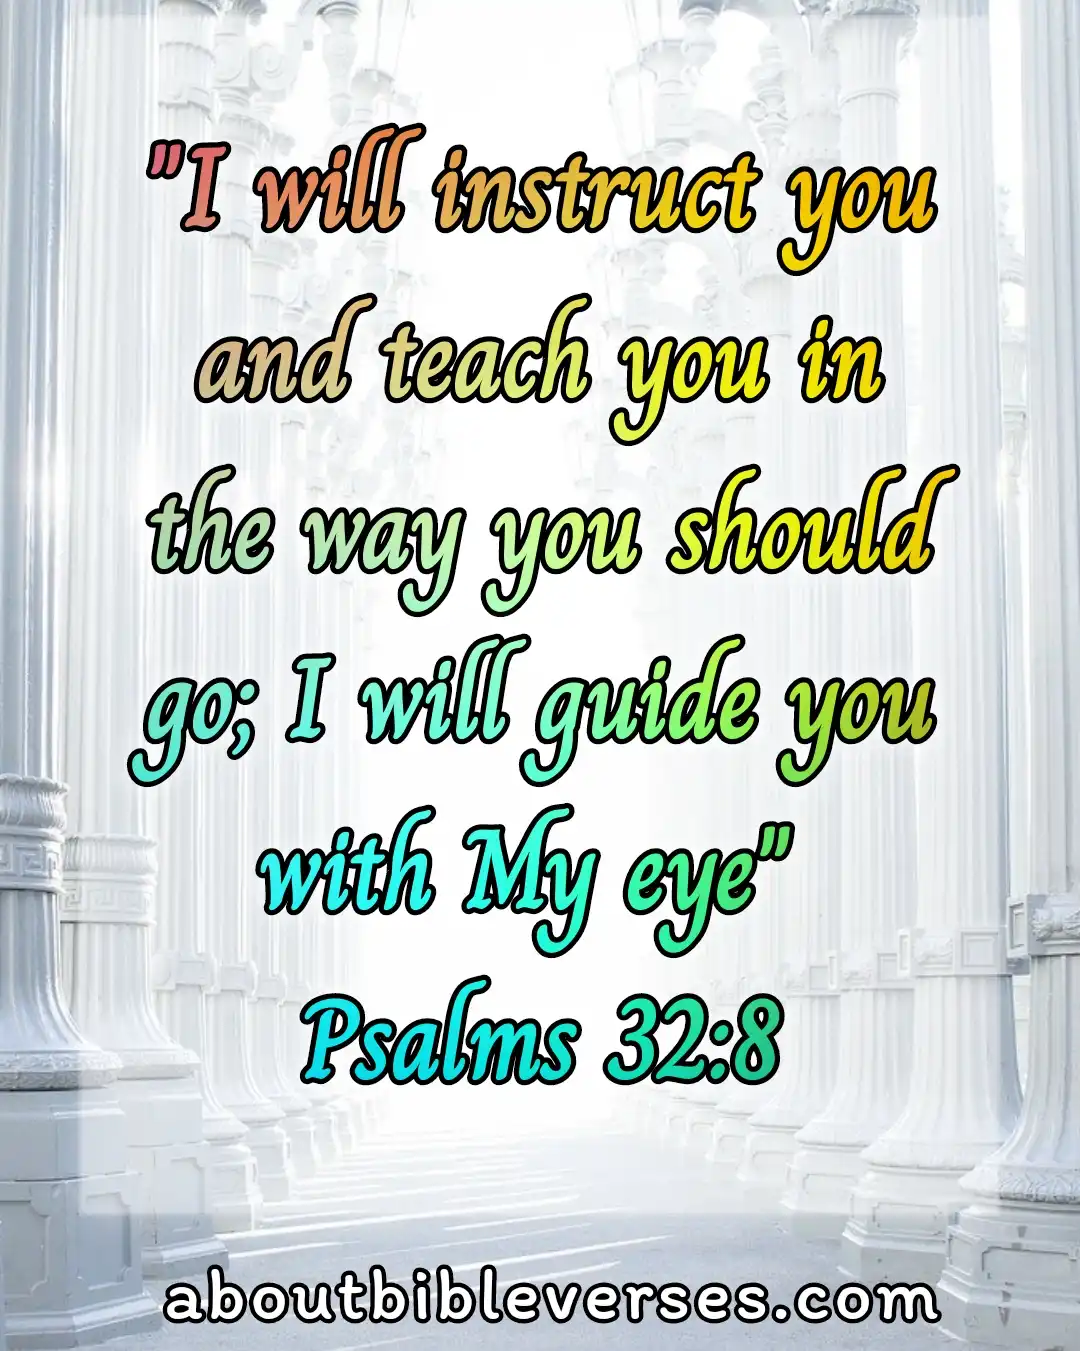 Bible Verses About Listening To The Voice Of God (Psalm 32:8)